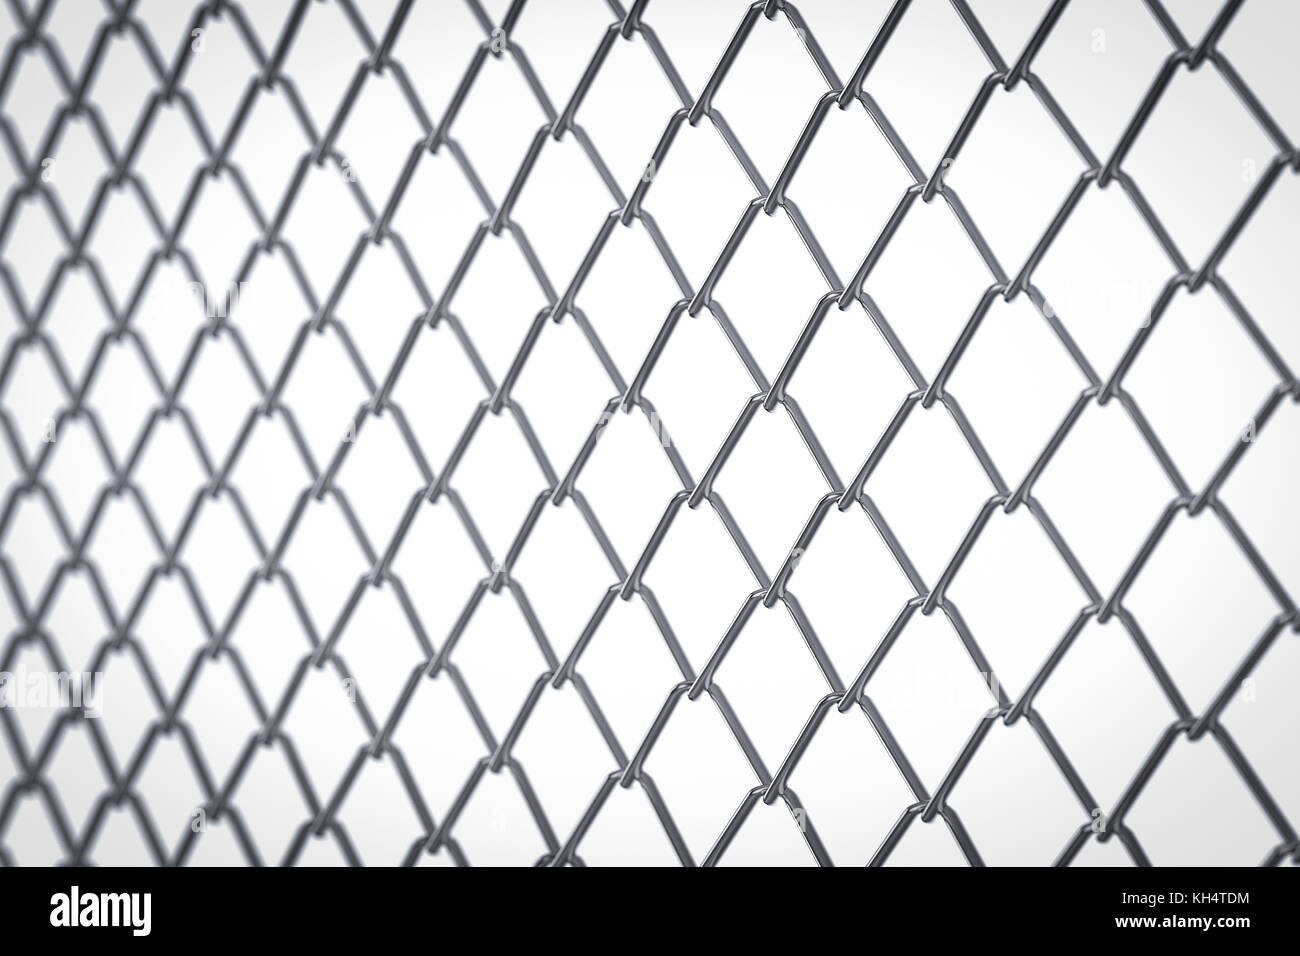 3d rendering metal mesh fence or chain fence on white background Stock Photo